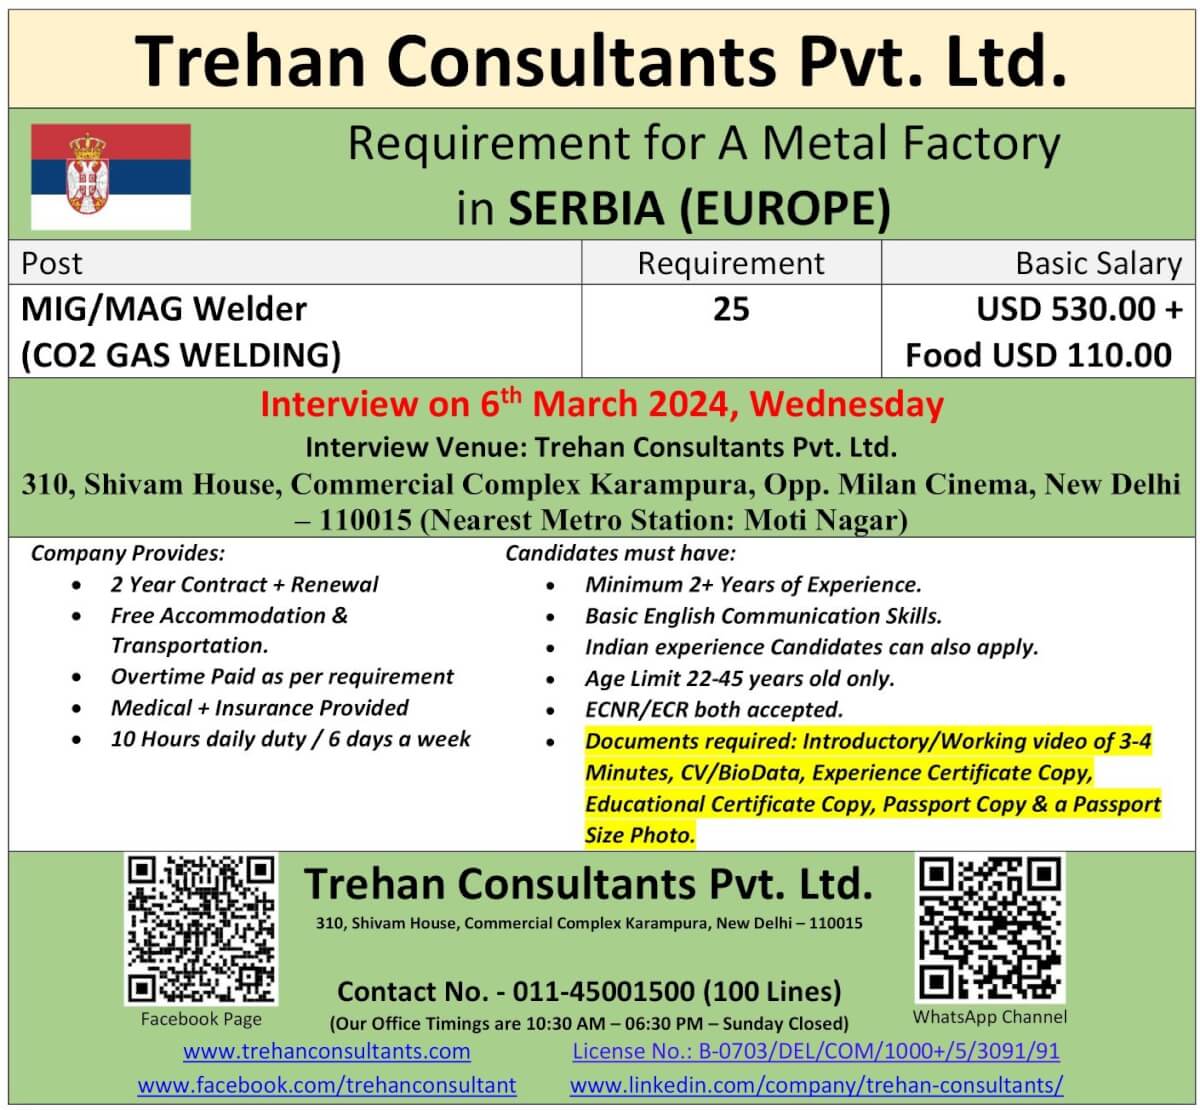 Requirement for A Metal Factory in SERBIA (EUROPE) - Interview Date : 6 March 2024, Wednesday